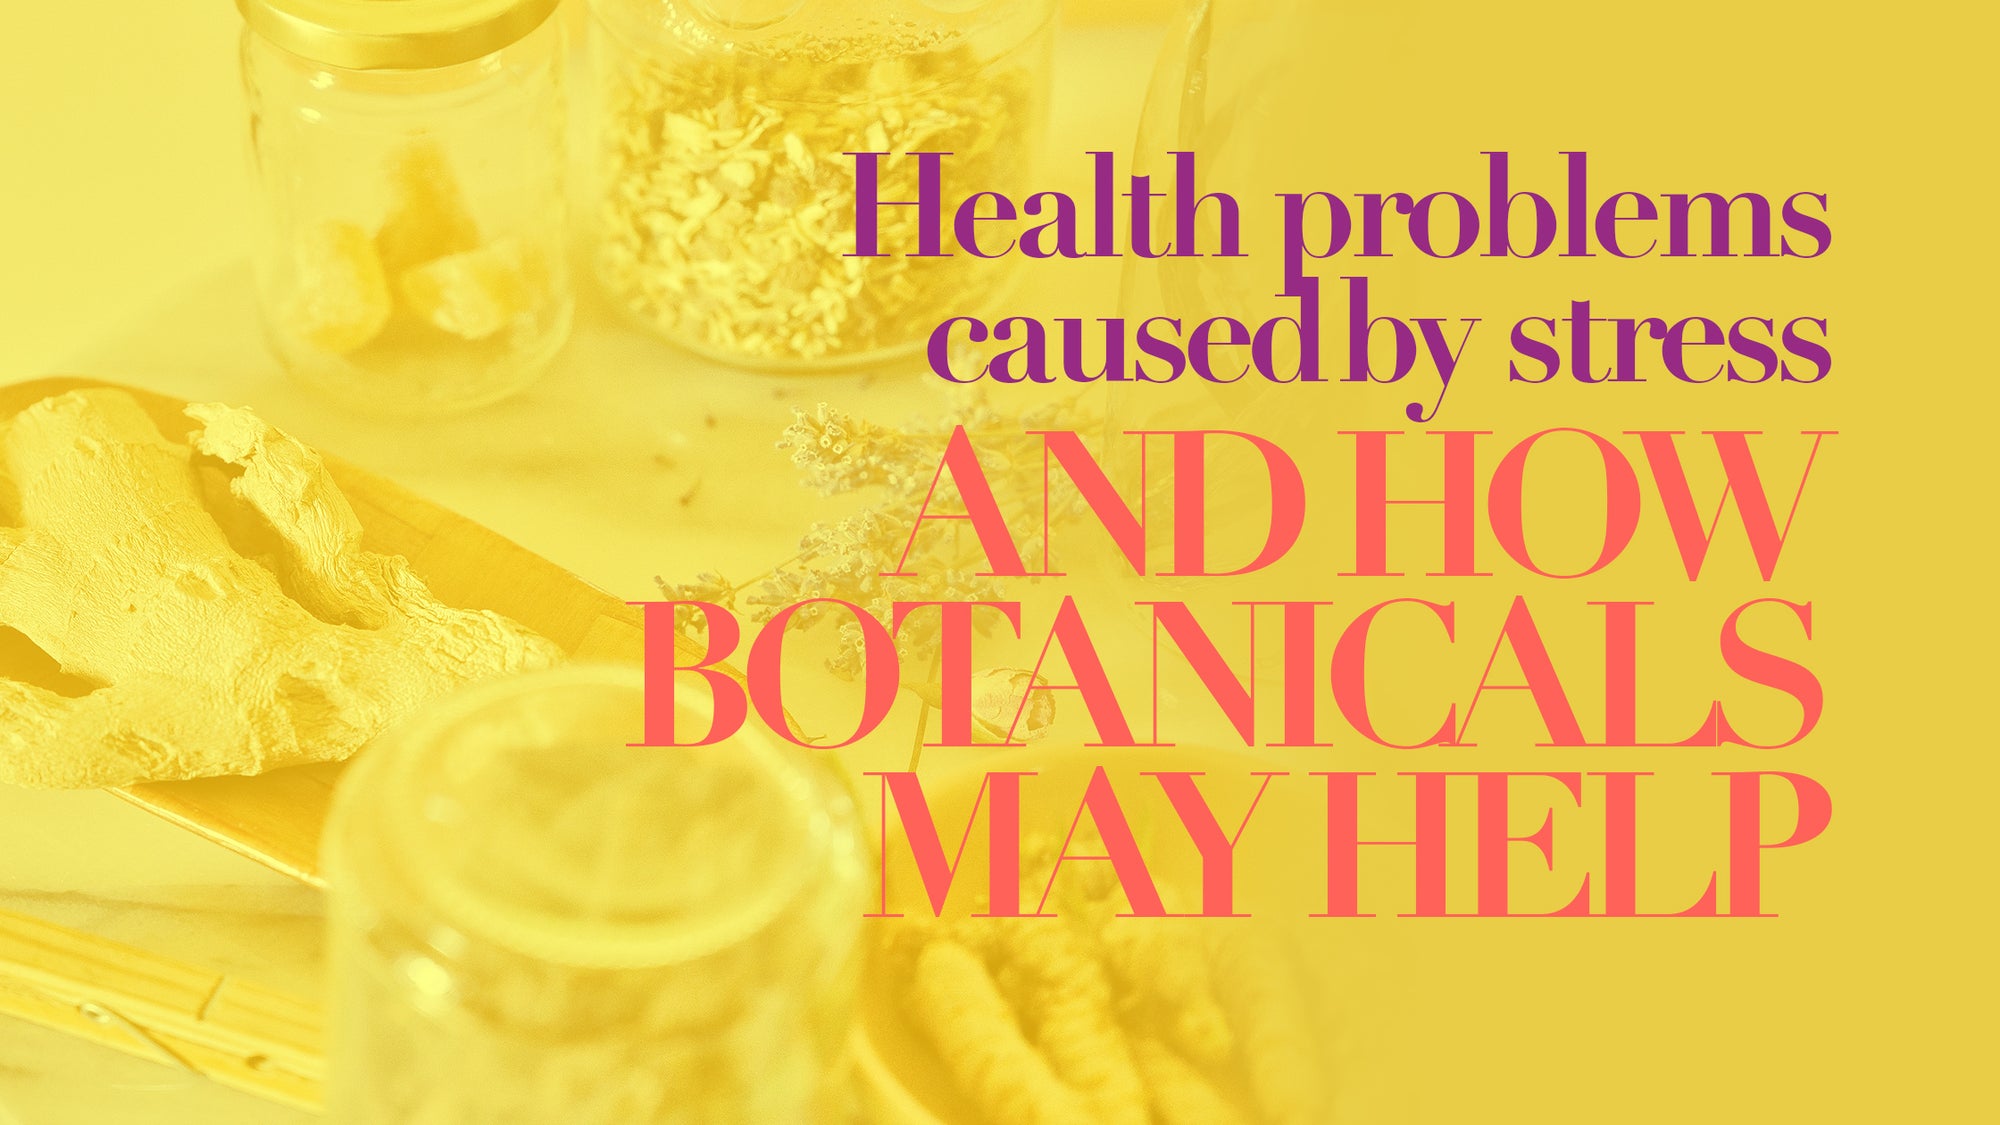 Health problems caused by stress and how botanicals can help